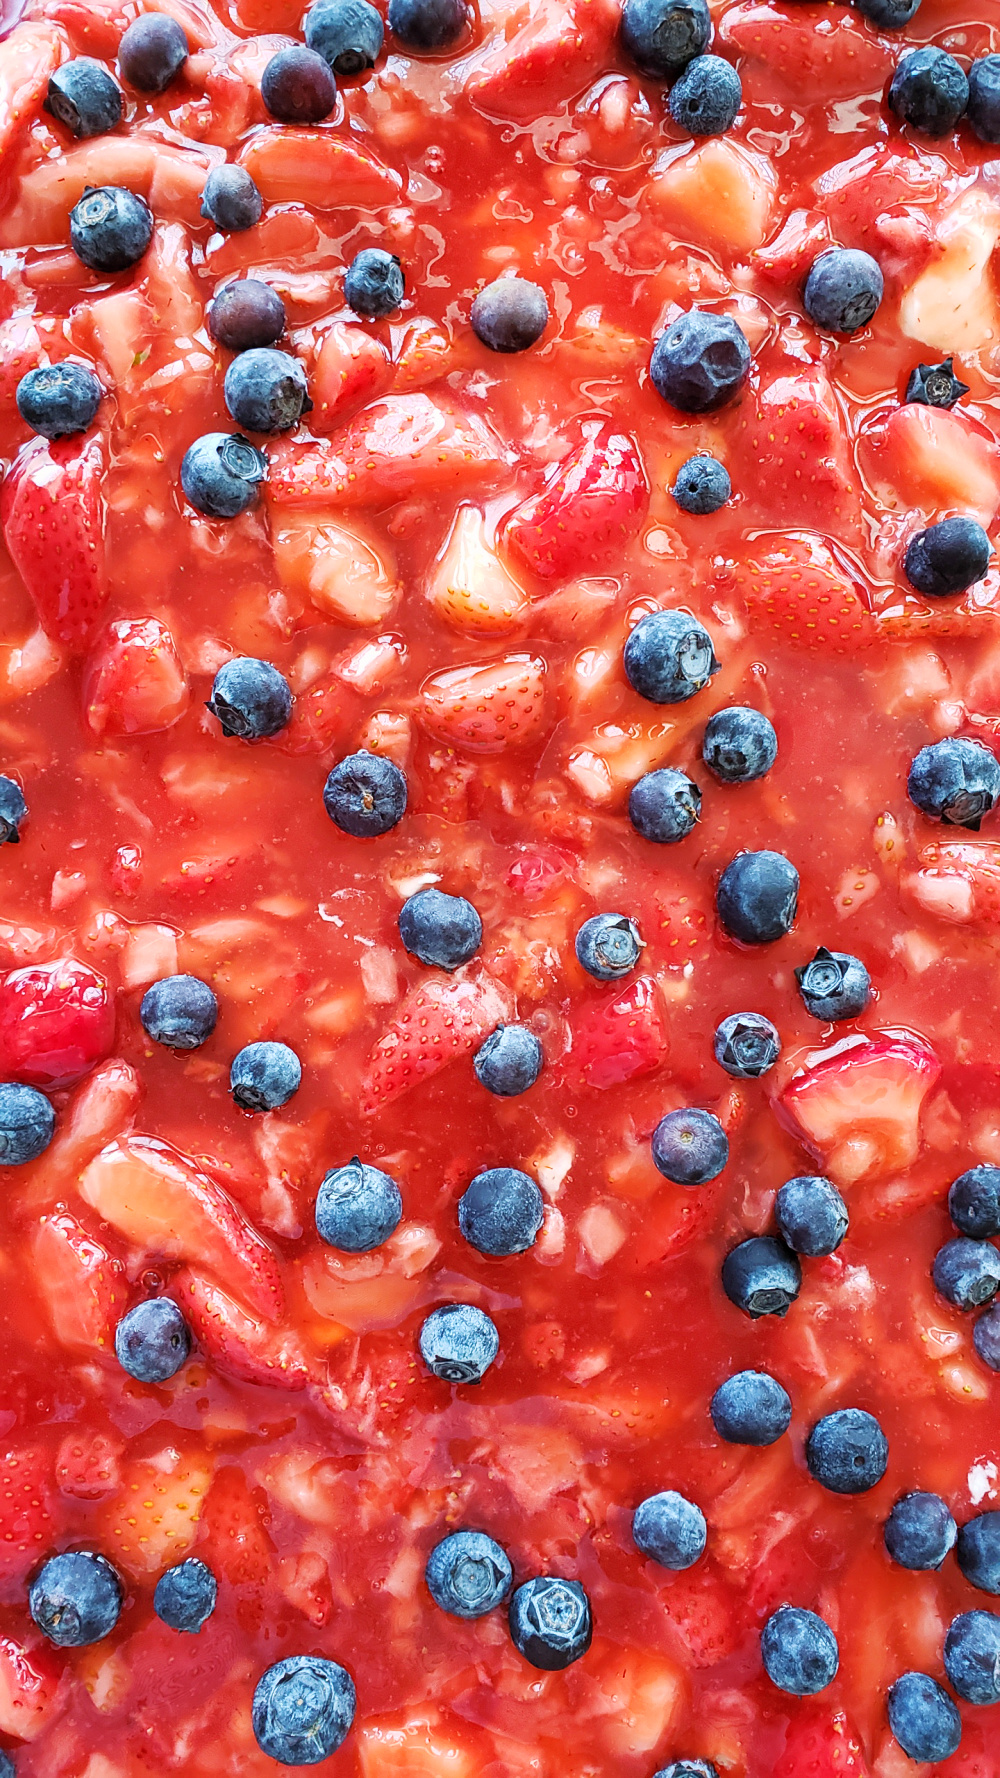 Strawberries and blueberries in a juicy layer